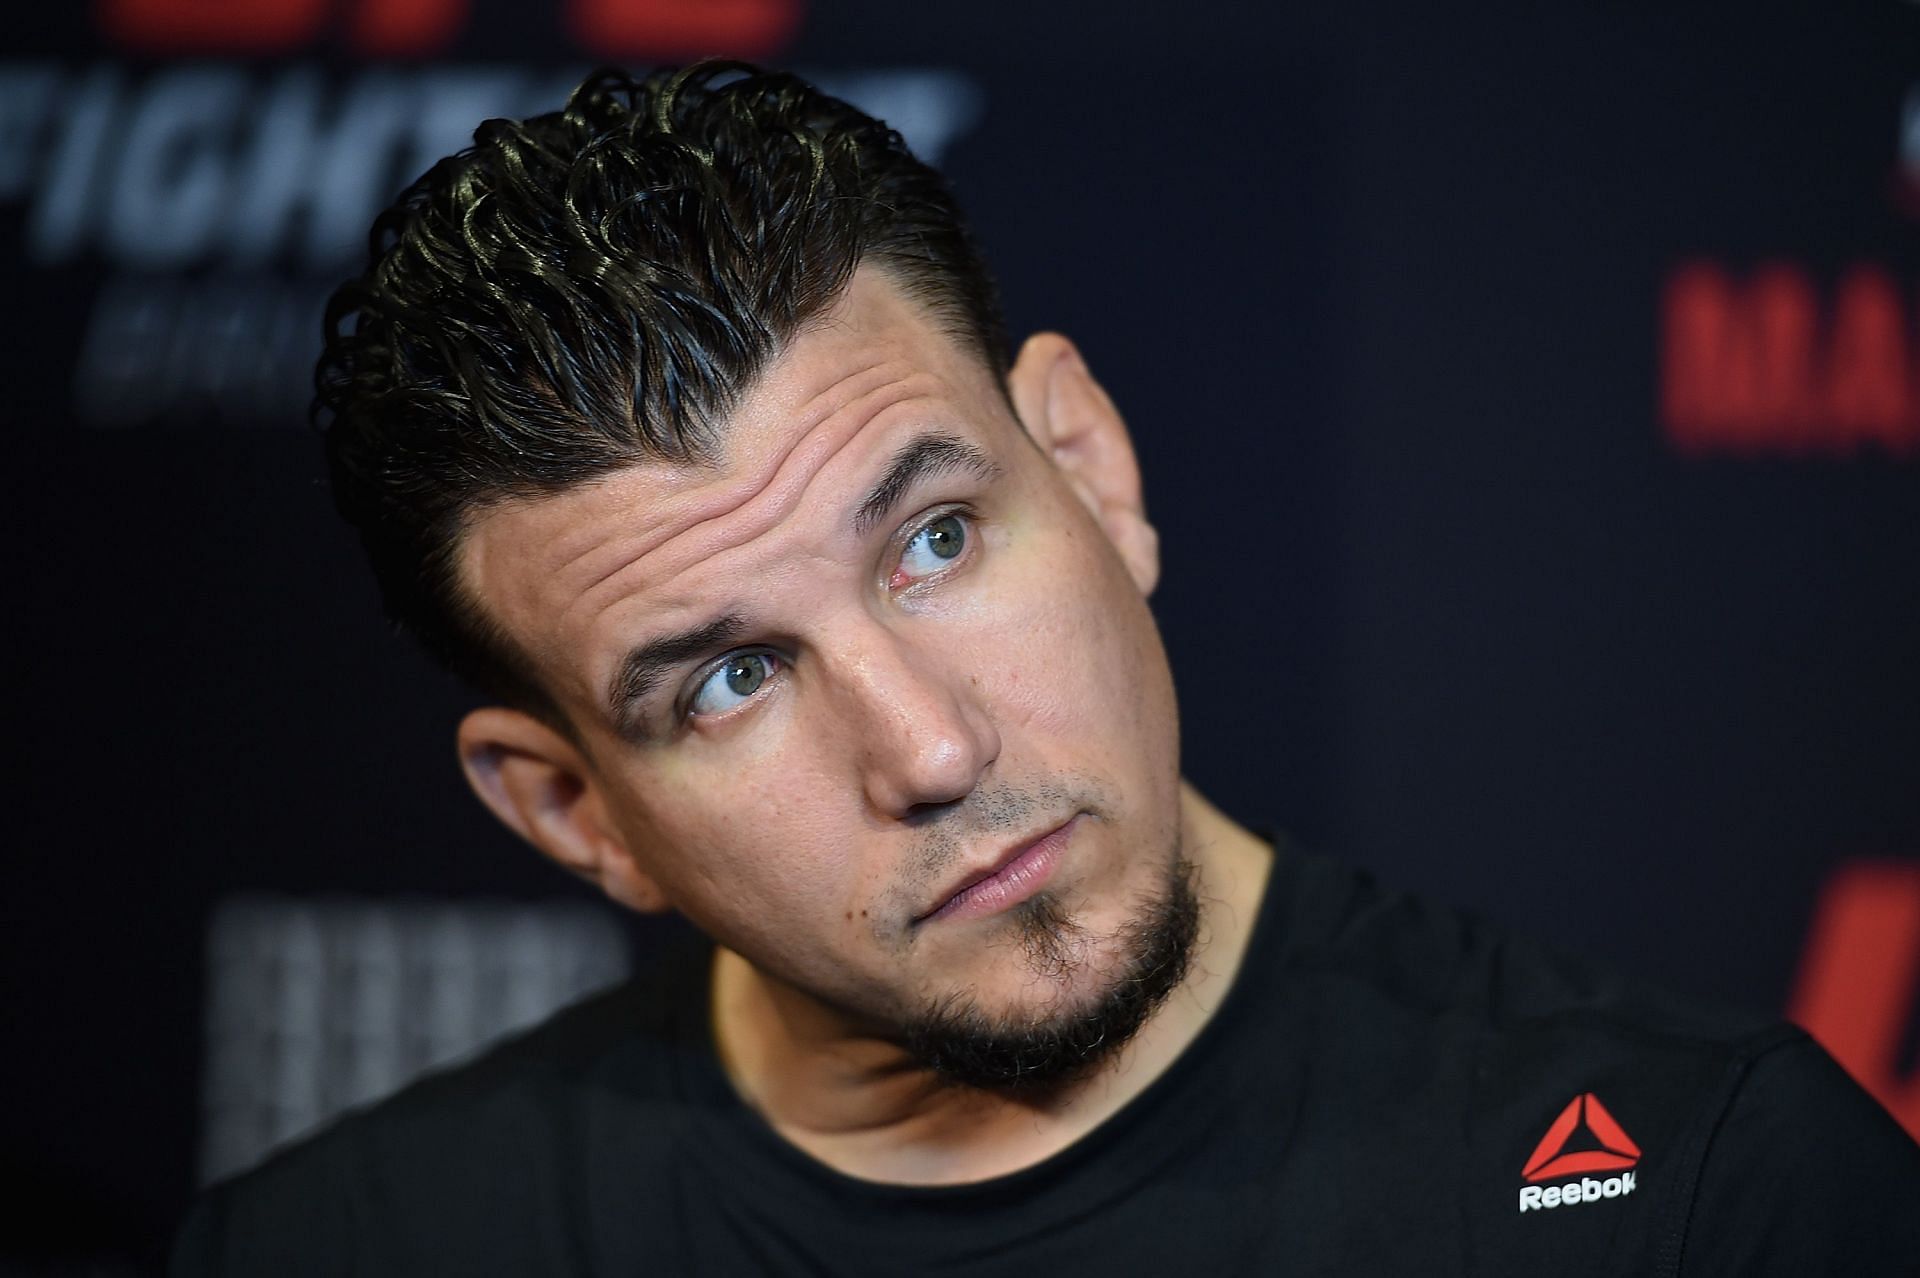 Frank Mir should be considered an all time great at heavyweight